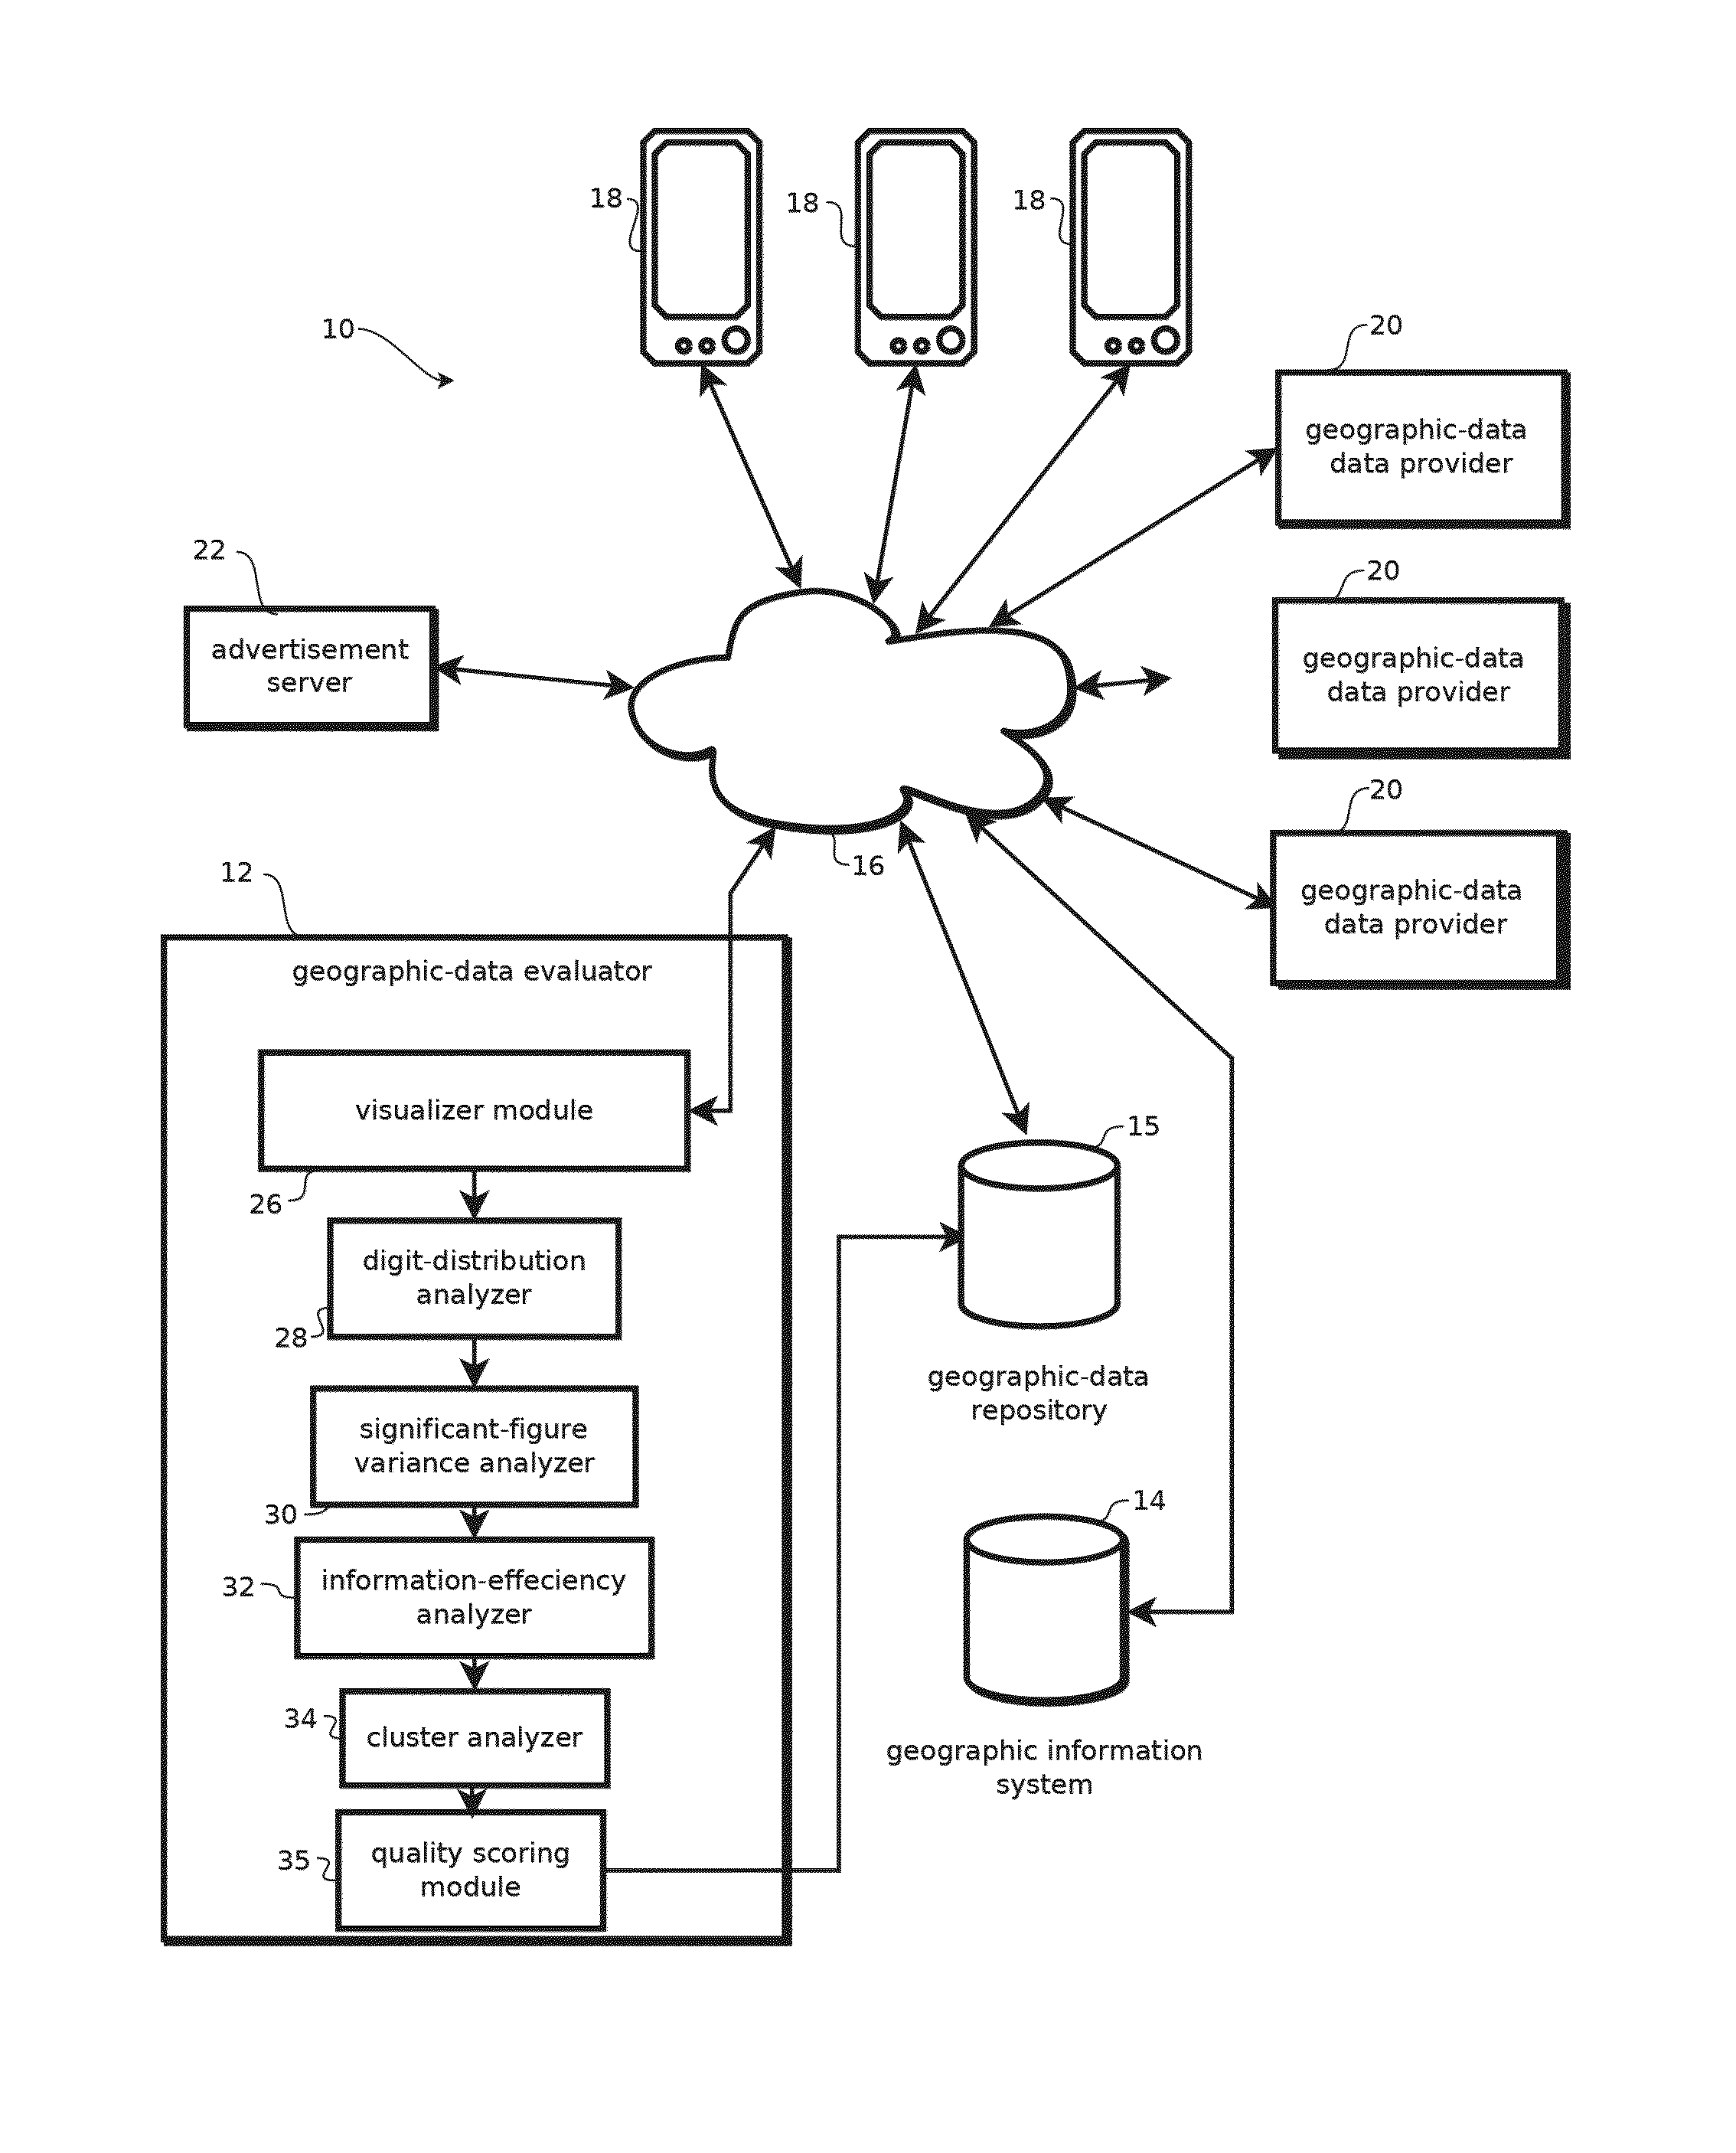 Apparatus and Method for Determining the Quality or Accuracy of Reported Locations